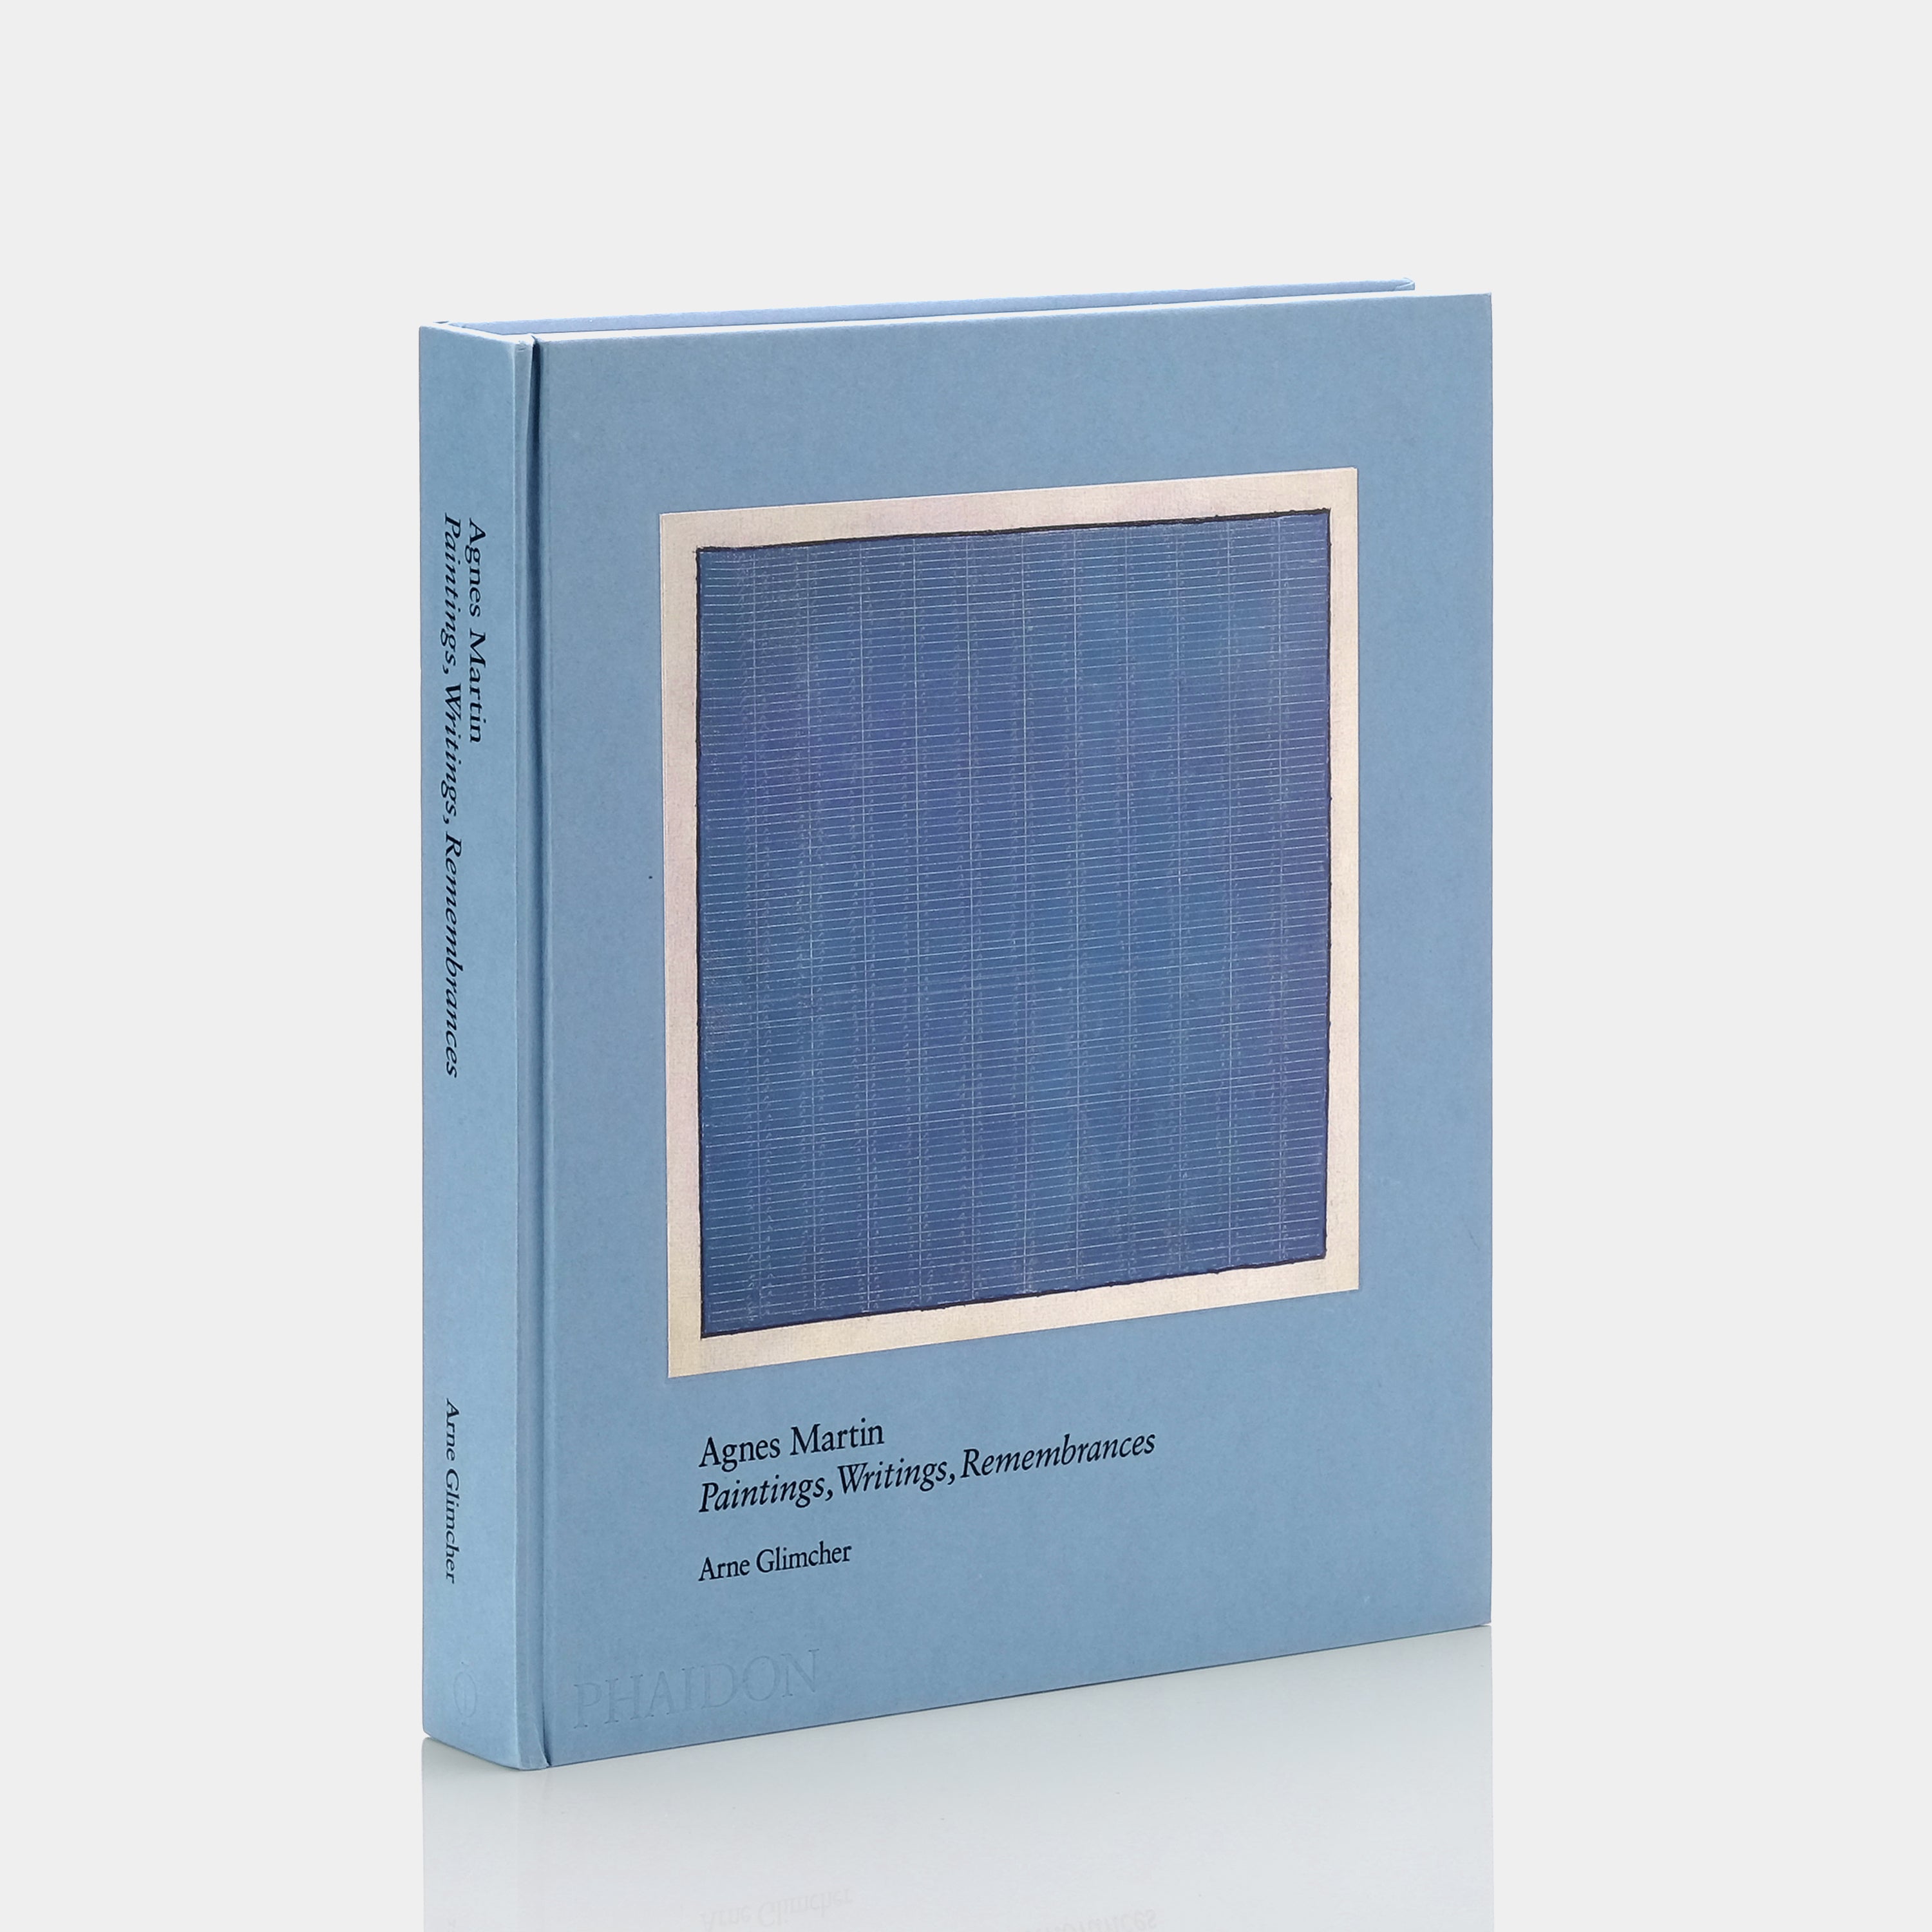 Agnes Martin: Painting, Writings, Remembrances by Arne Glimcher Phaidon Book